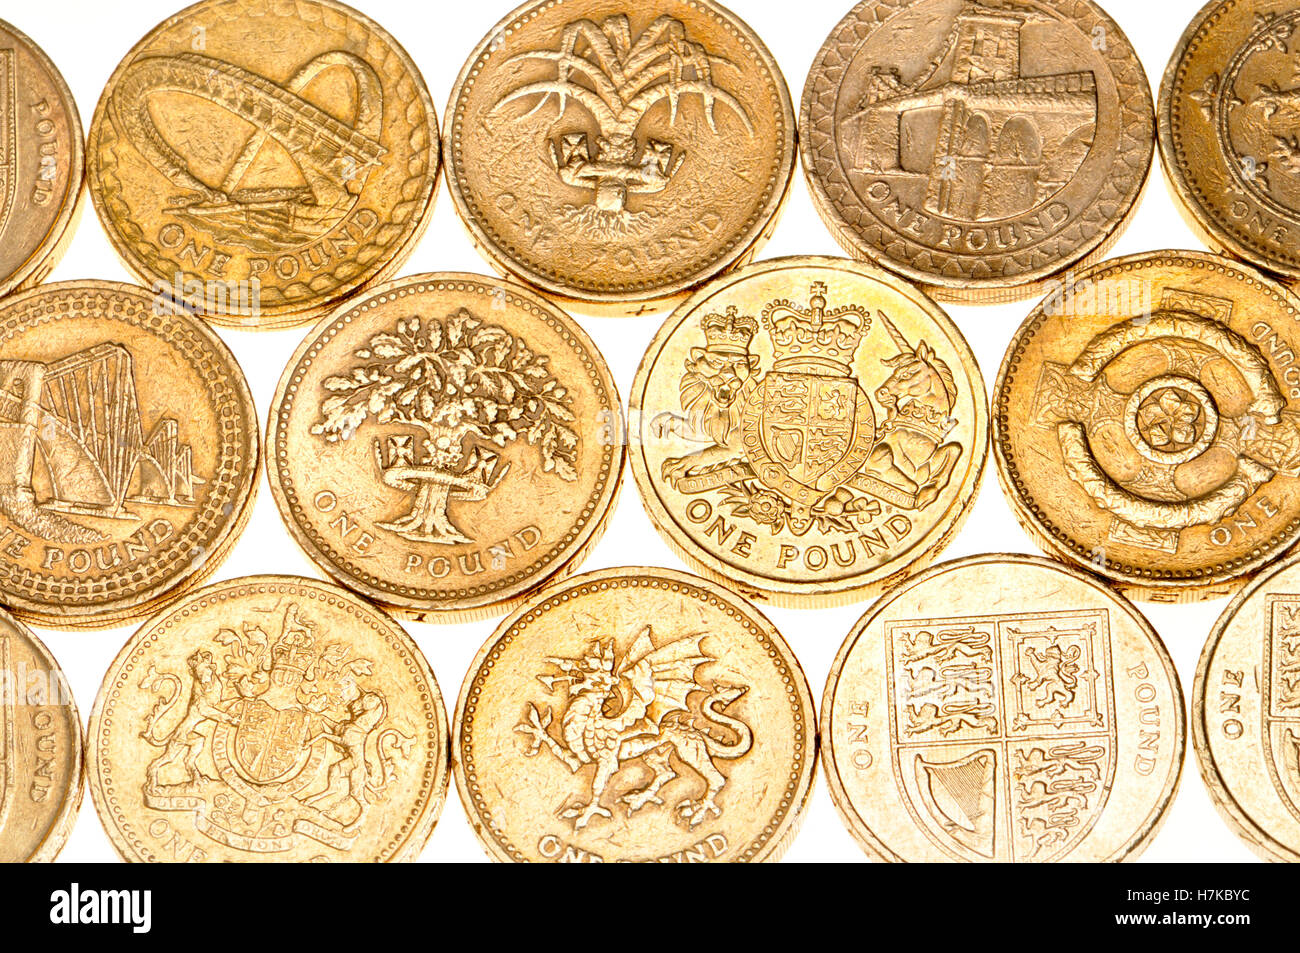 British pound coins with different designs on the reverse Stock Photo